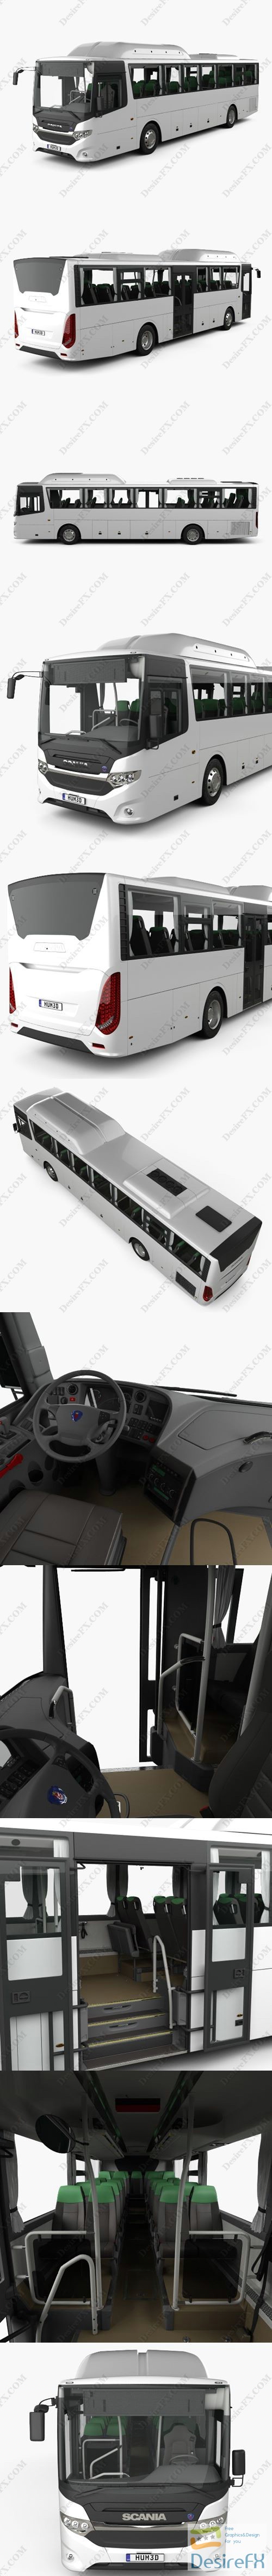 Scania Interlink Bus with HQ interior 2015 3D Model